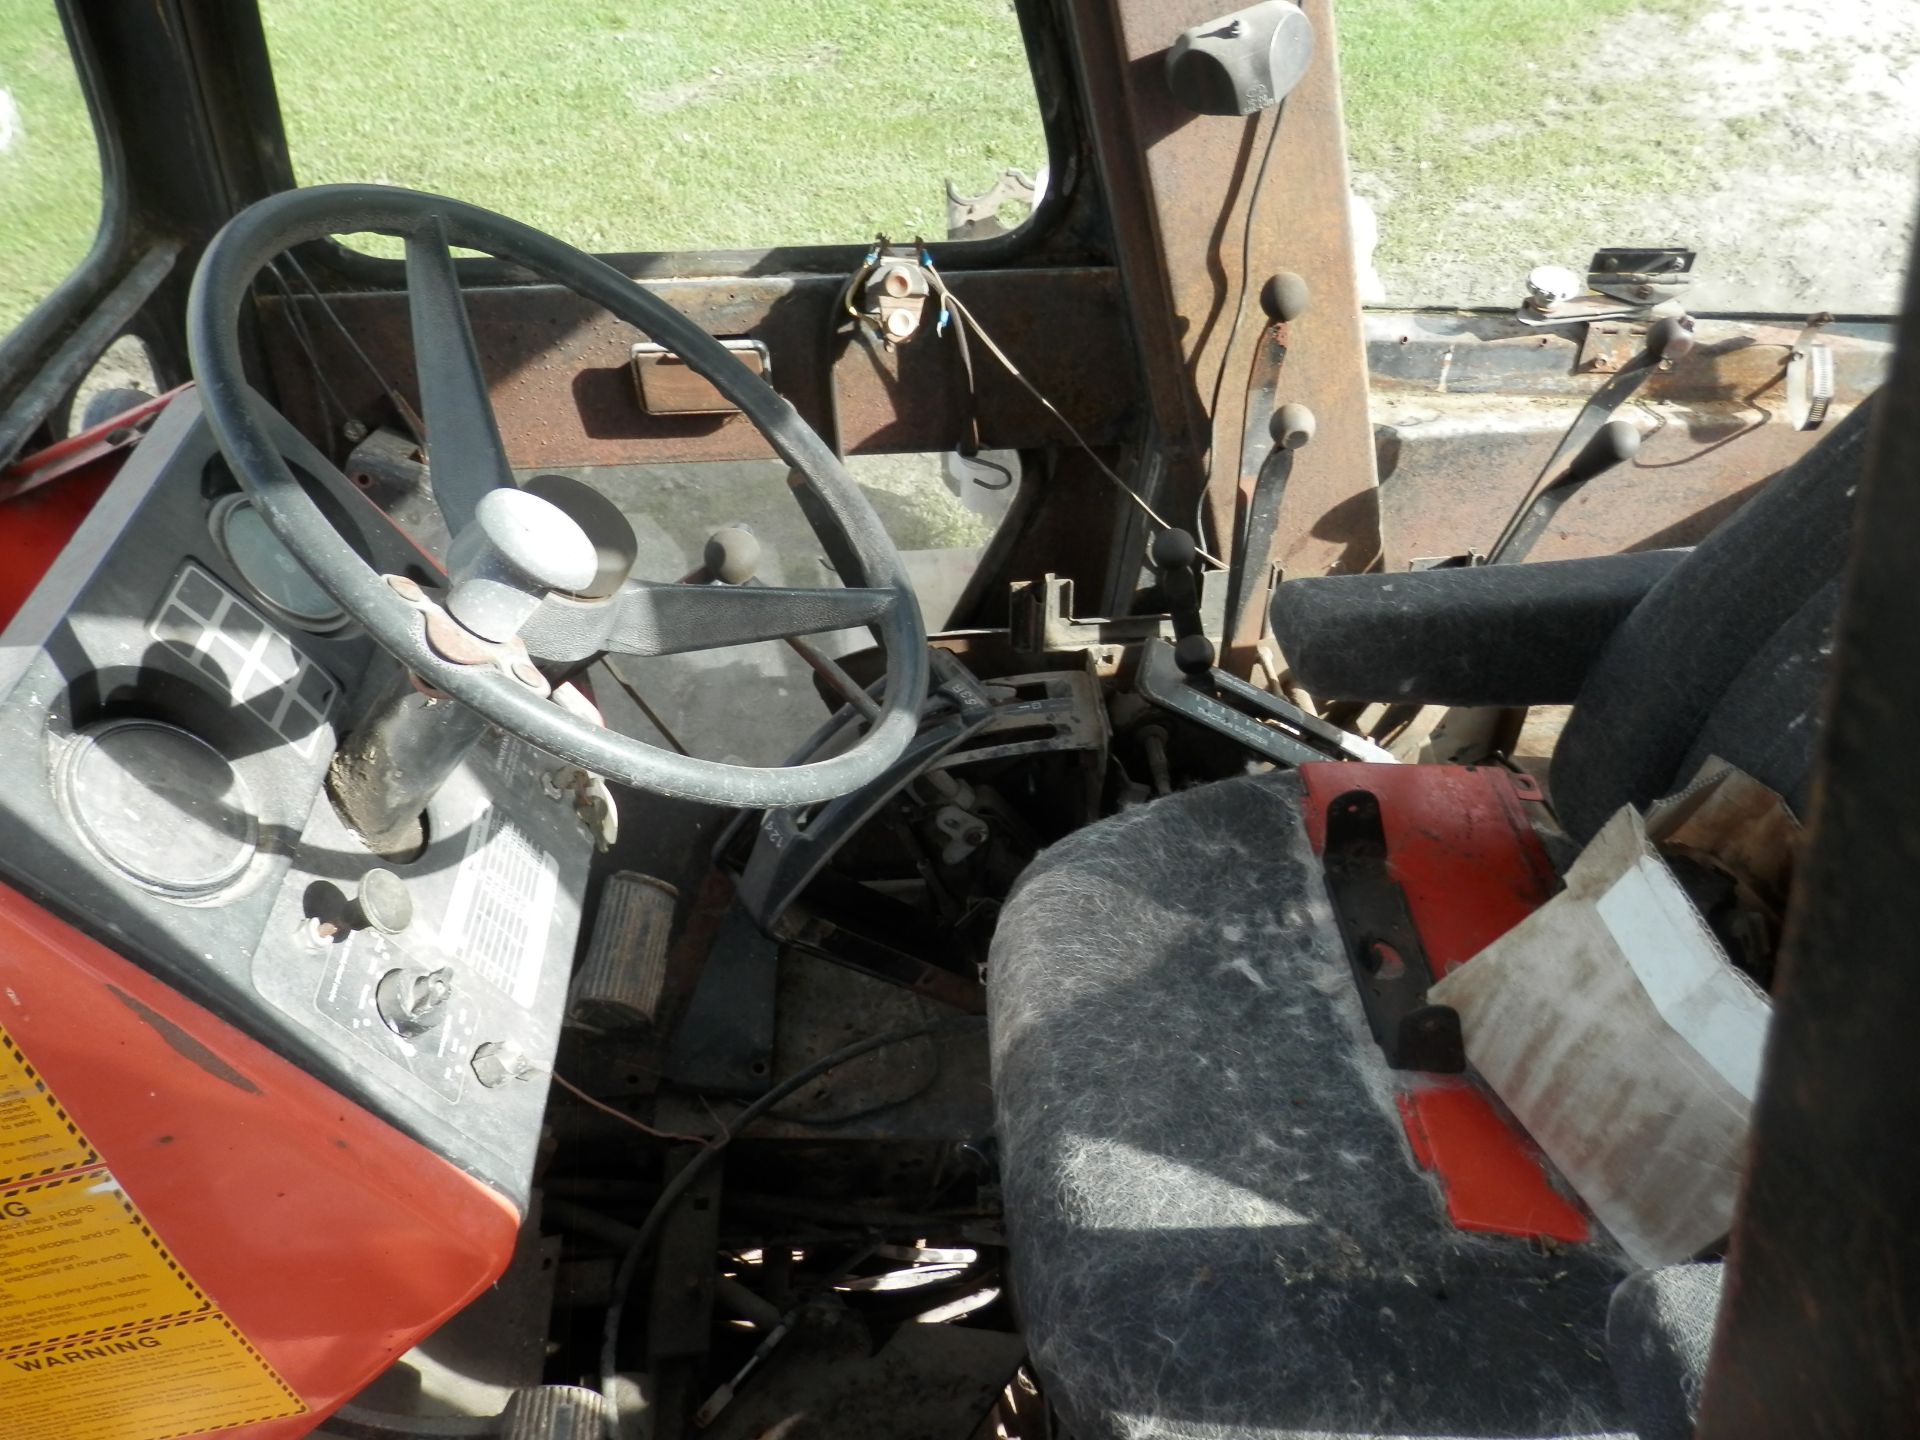 ALLIS CHALMERS 8550 4x4 TRACTOR, PARTS or PROJECT SN 1410 - Image 10 of 11